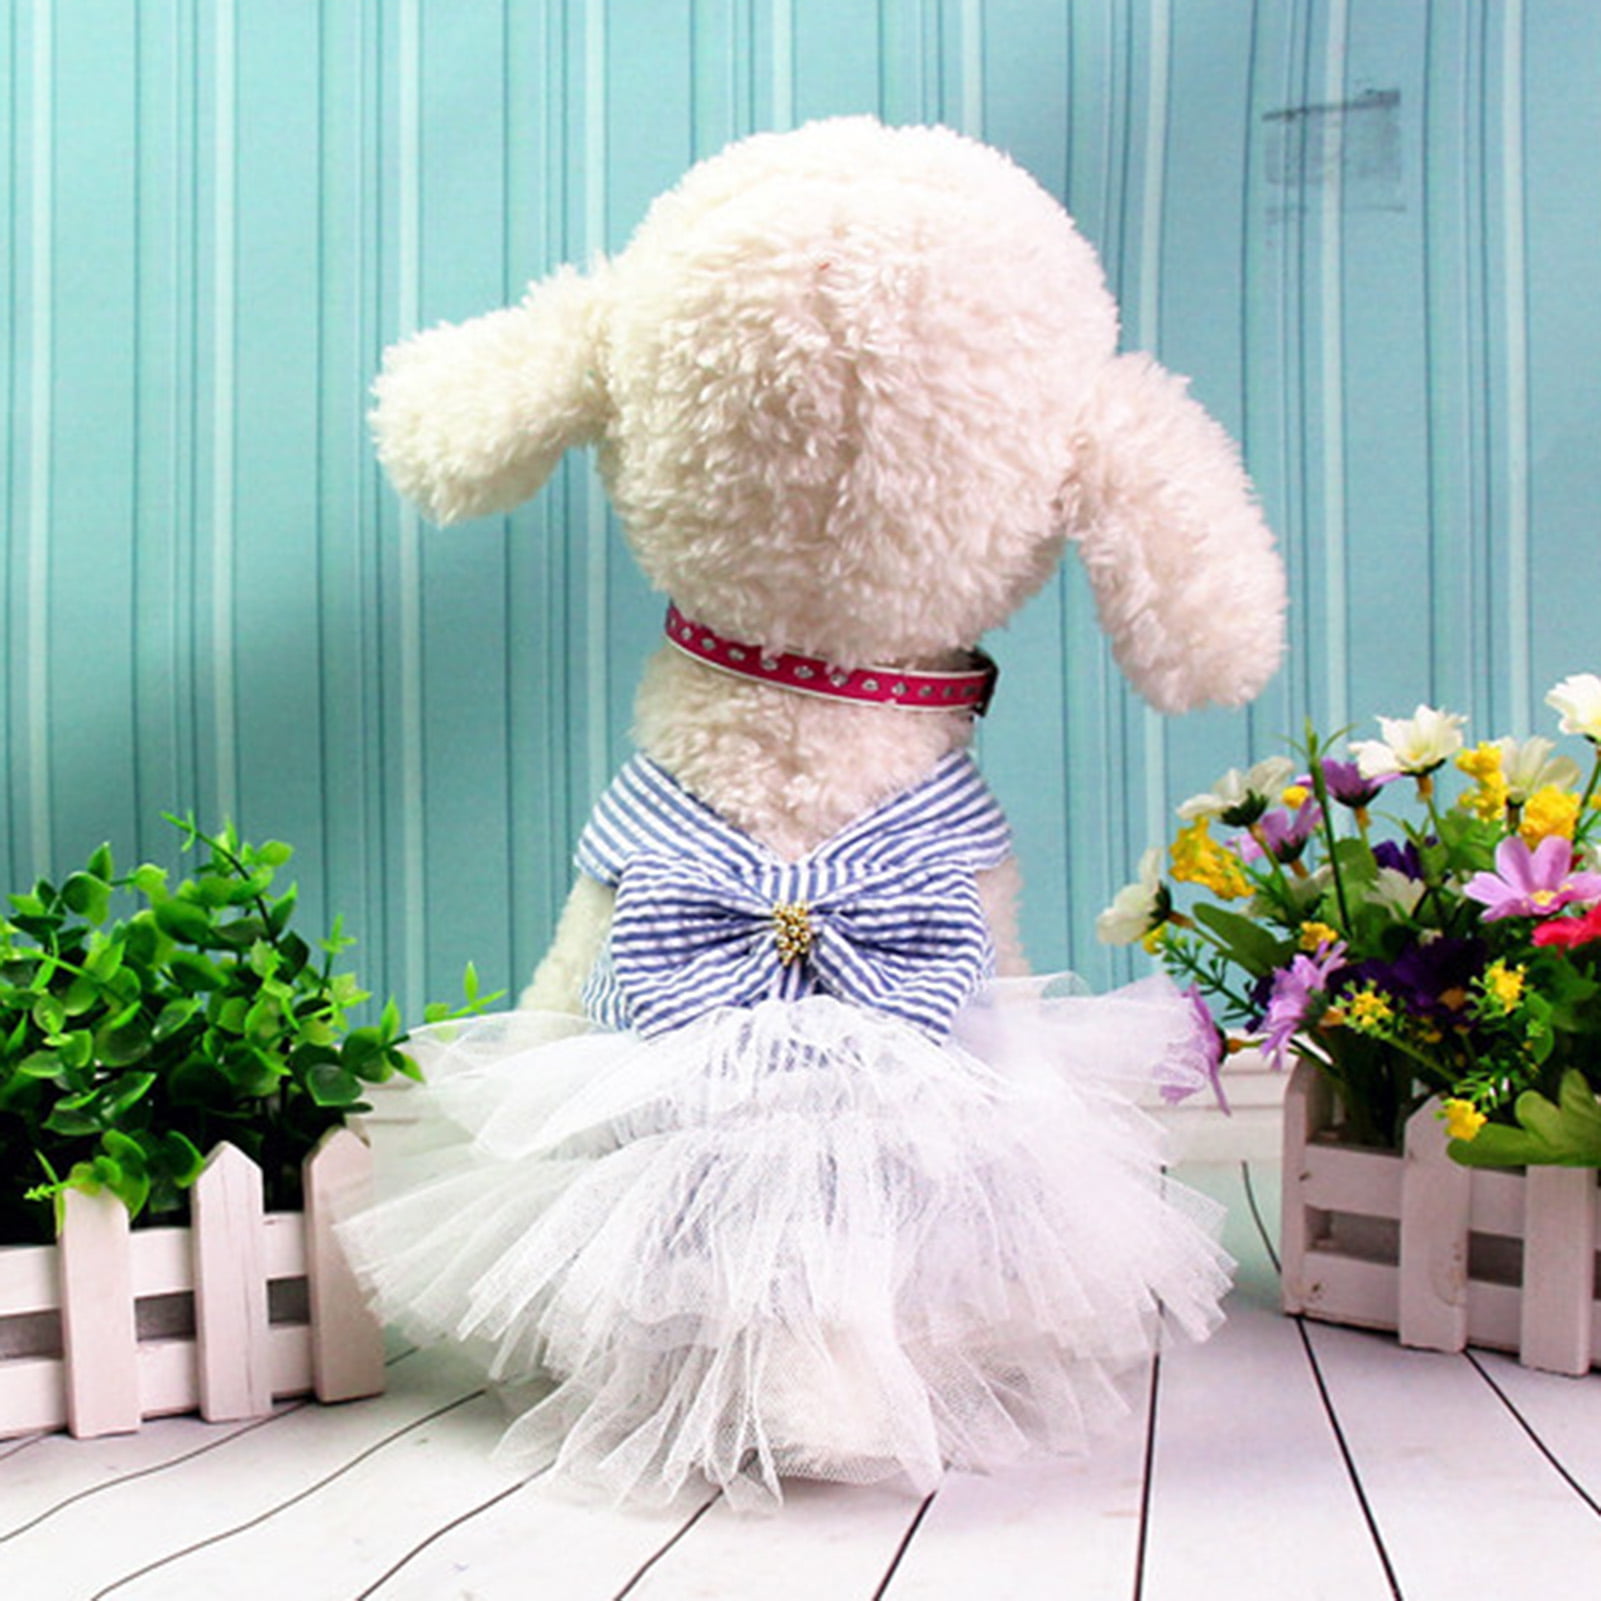 Details about   Happy go Fluffy Cream lamb stuffed plush animal 9.5" Multicolored ears and feet 